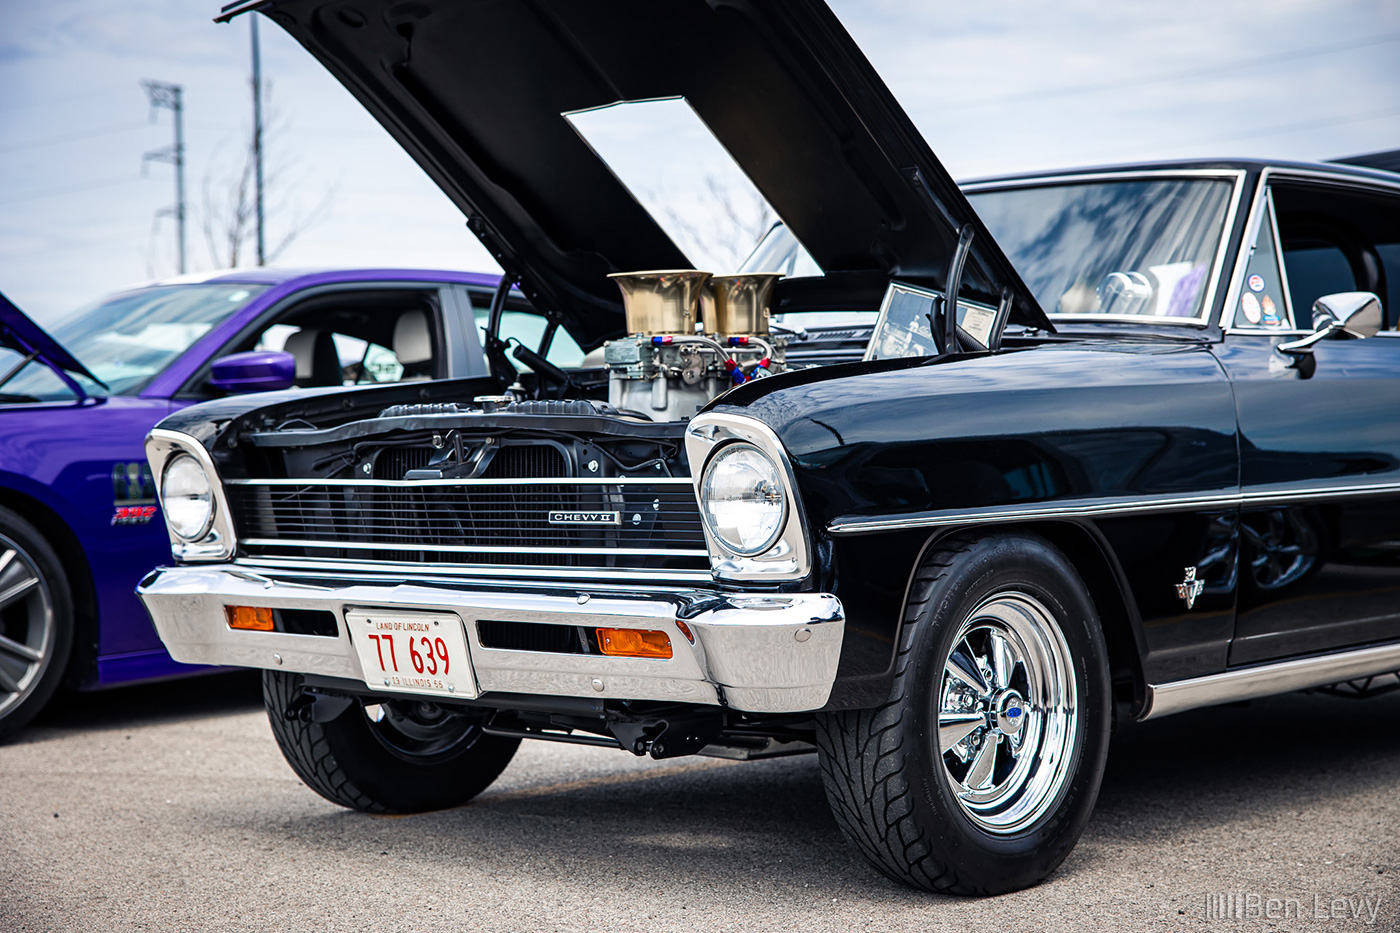 Front of Black Chevy II at Branding Iron Car Show